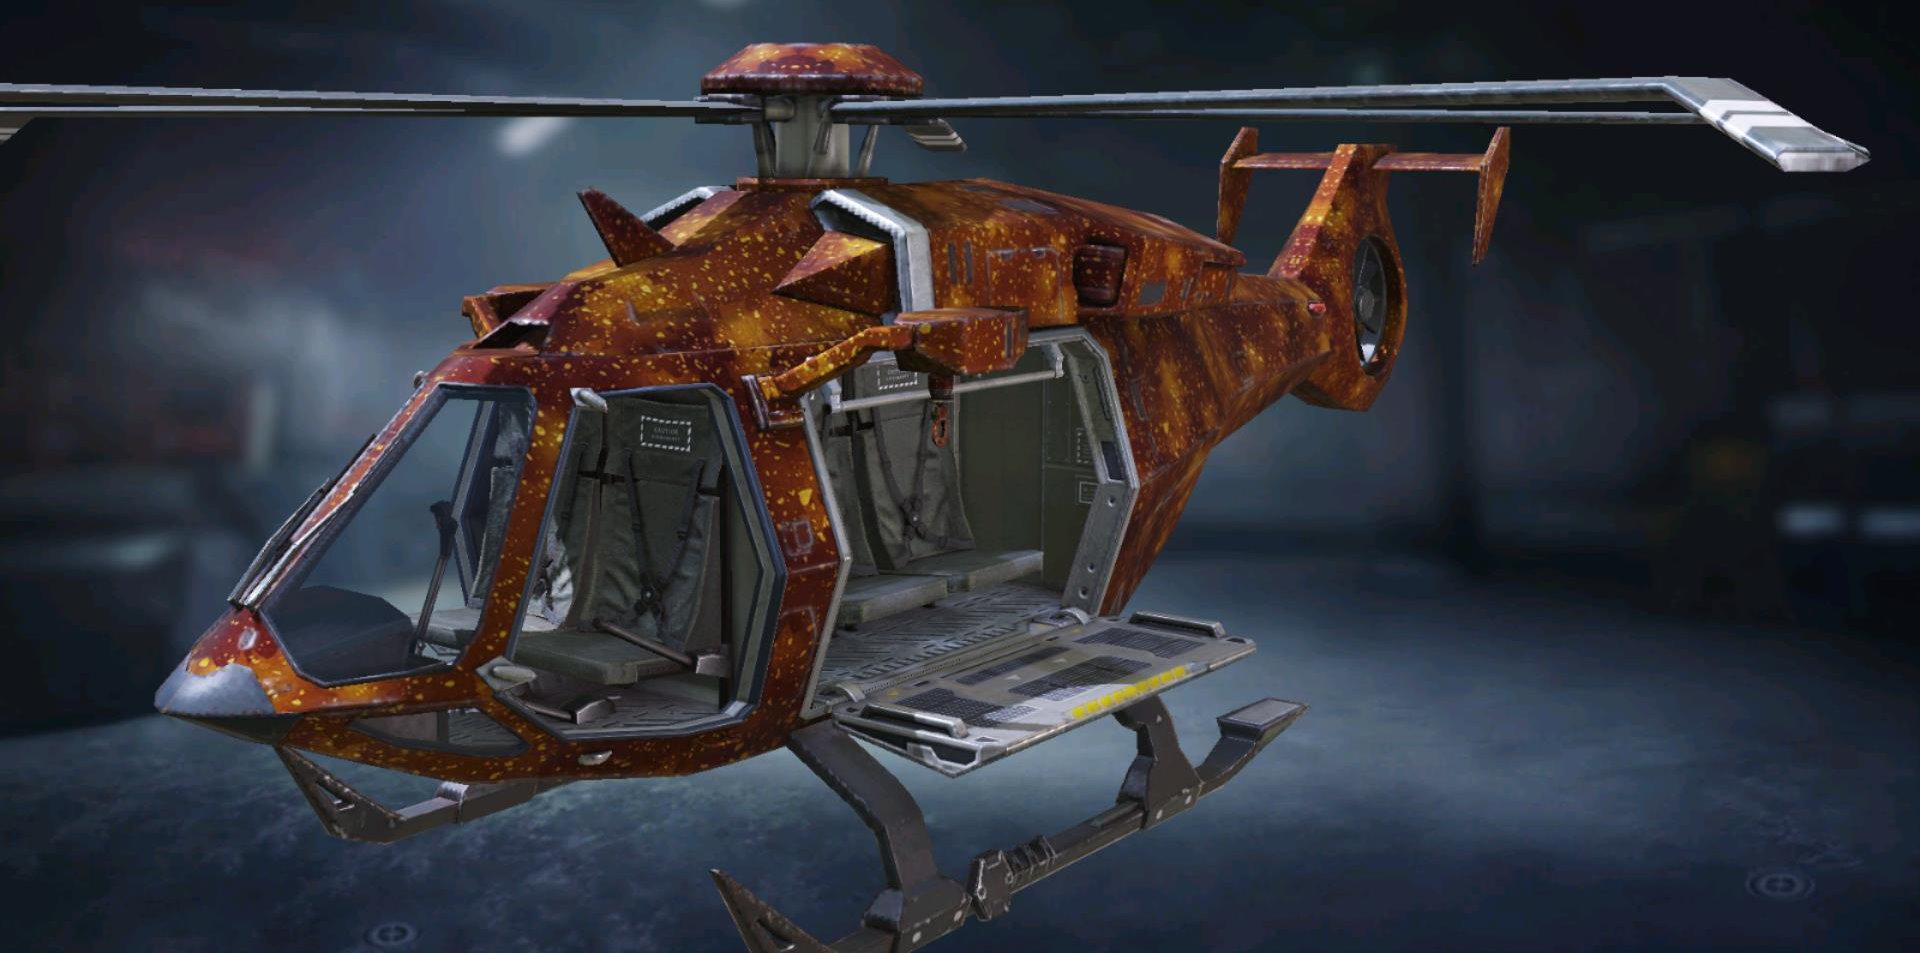 Helicopter Tarnished, Uncommon camo in Call of Duty Mobile